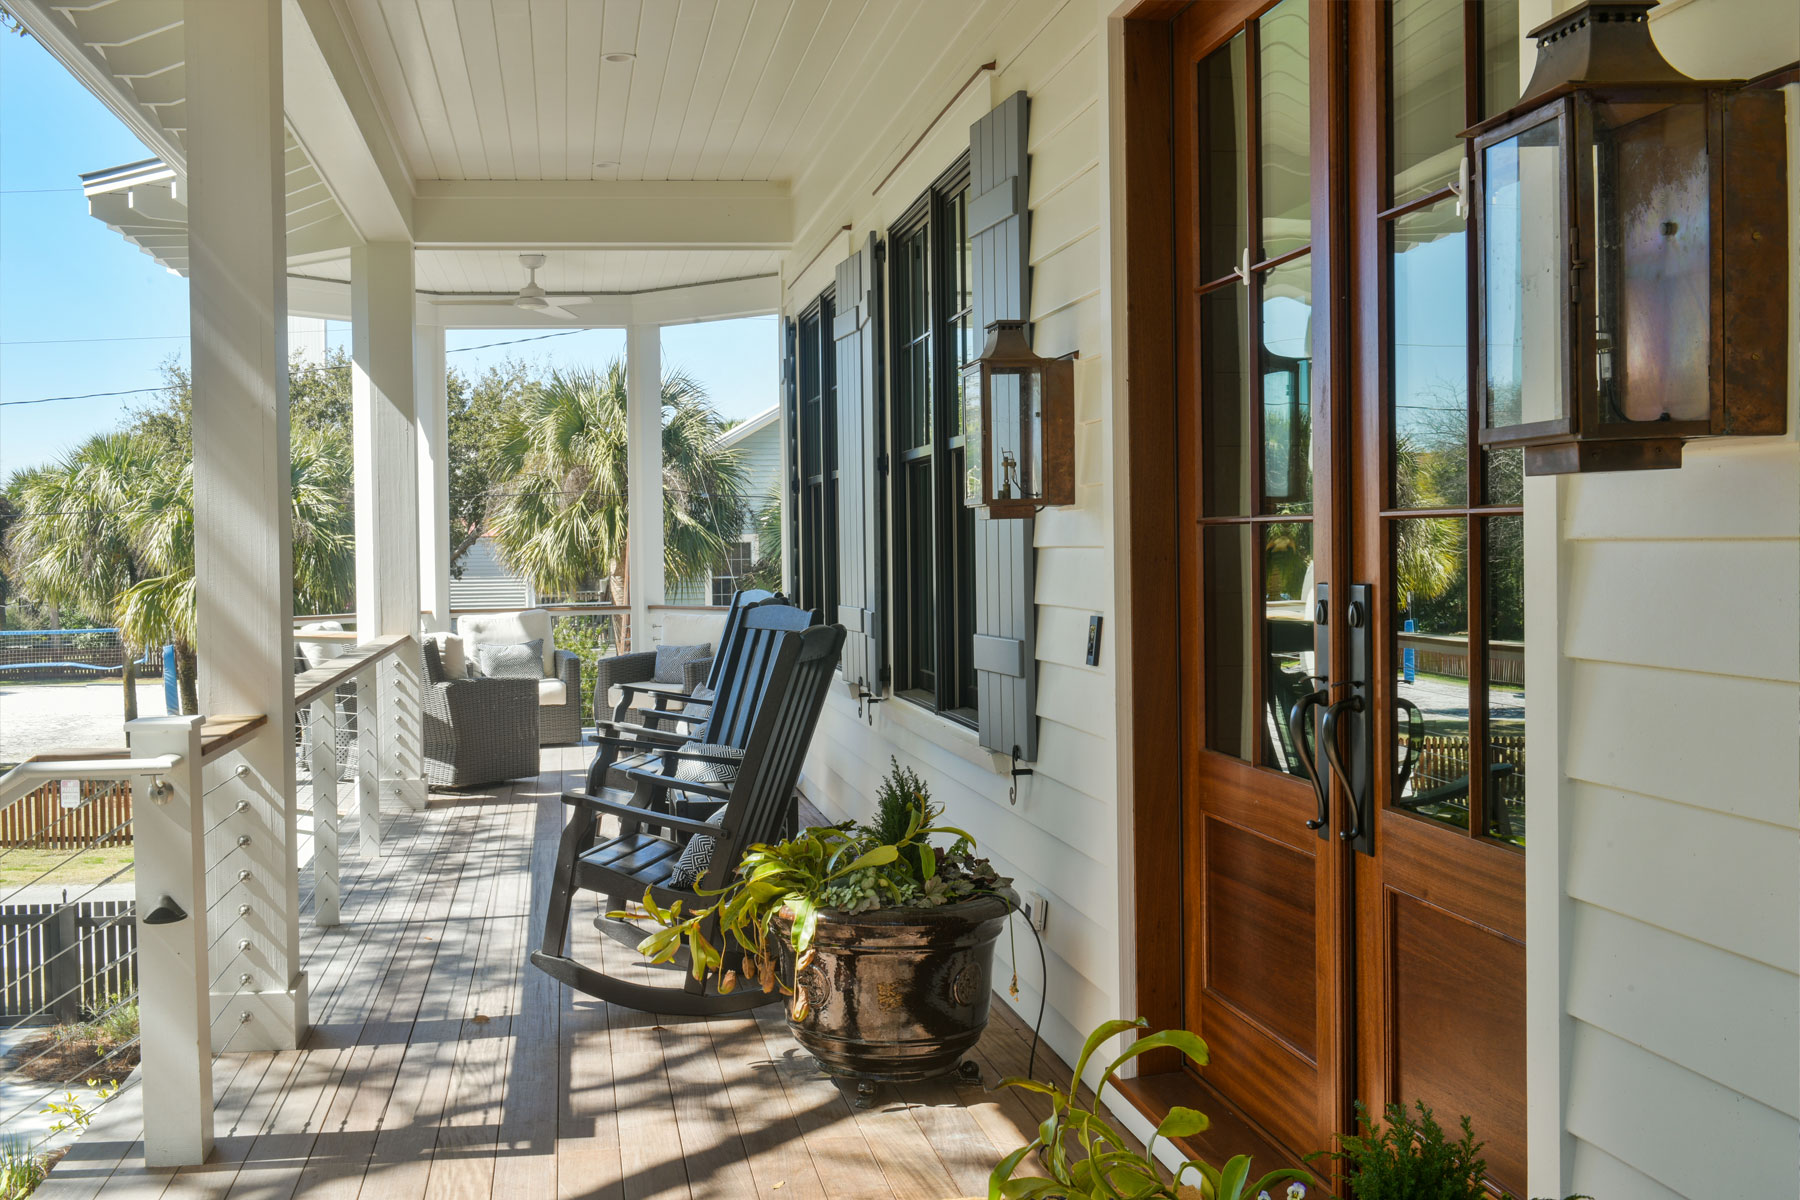 Coastal style, covered front porch with adjacent seating area